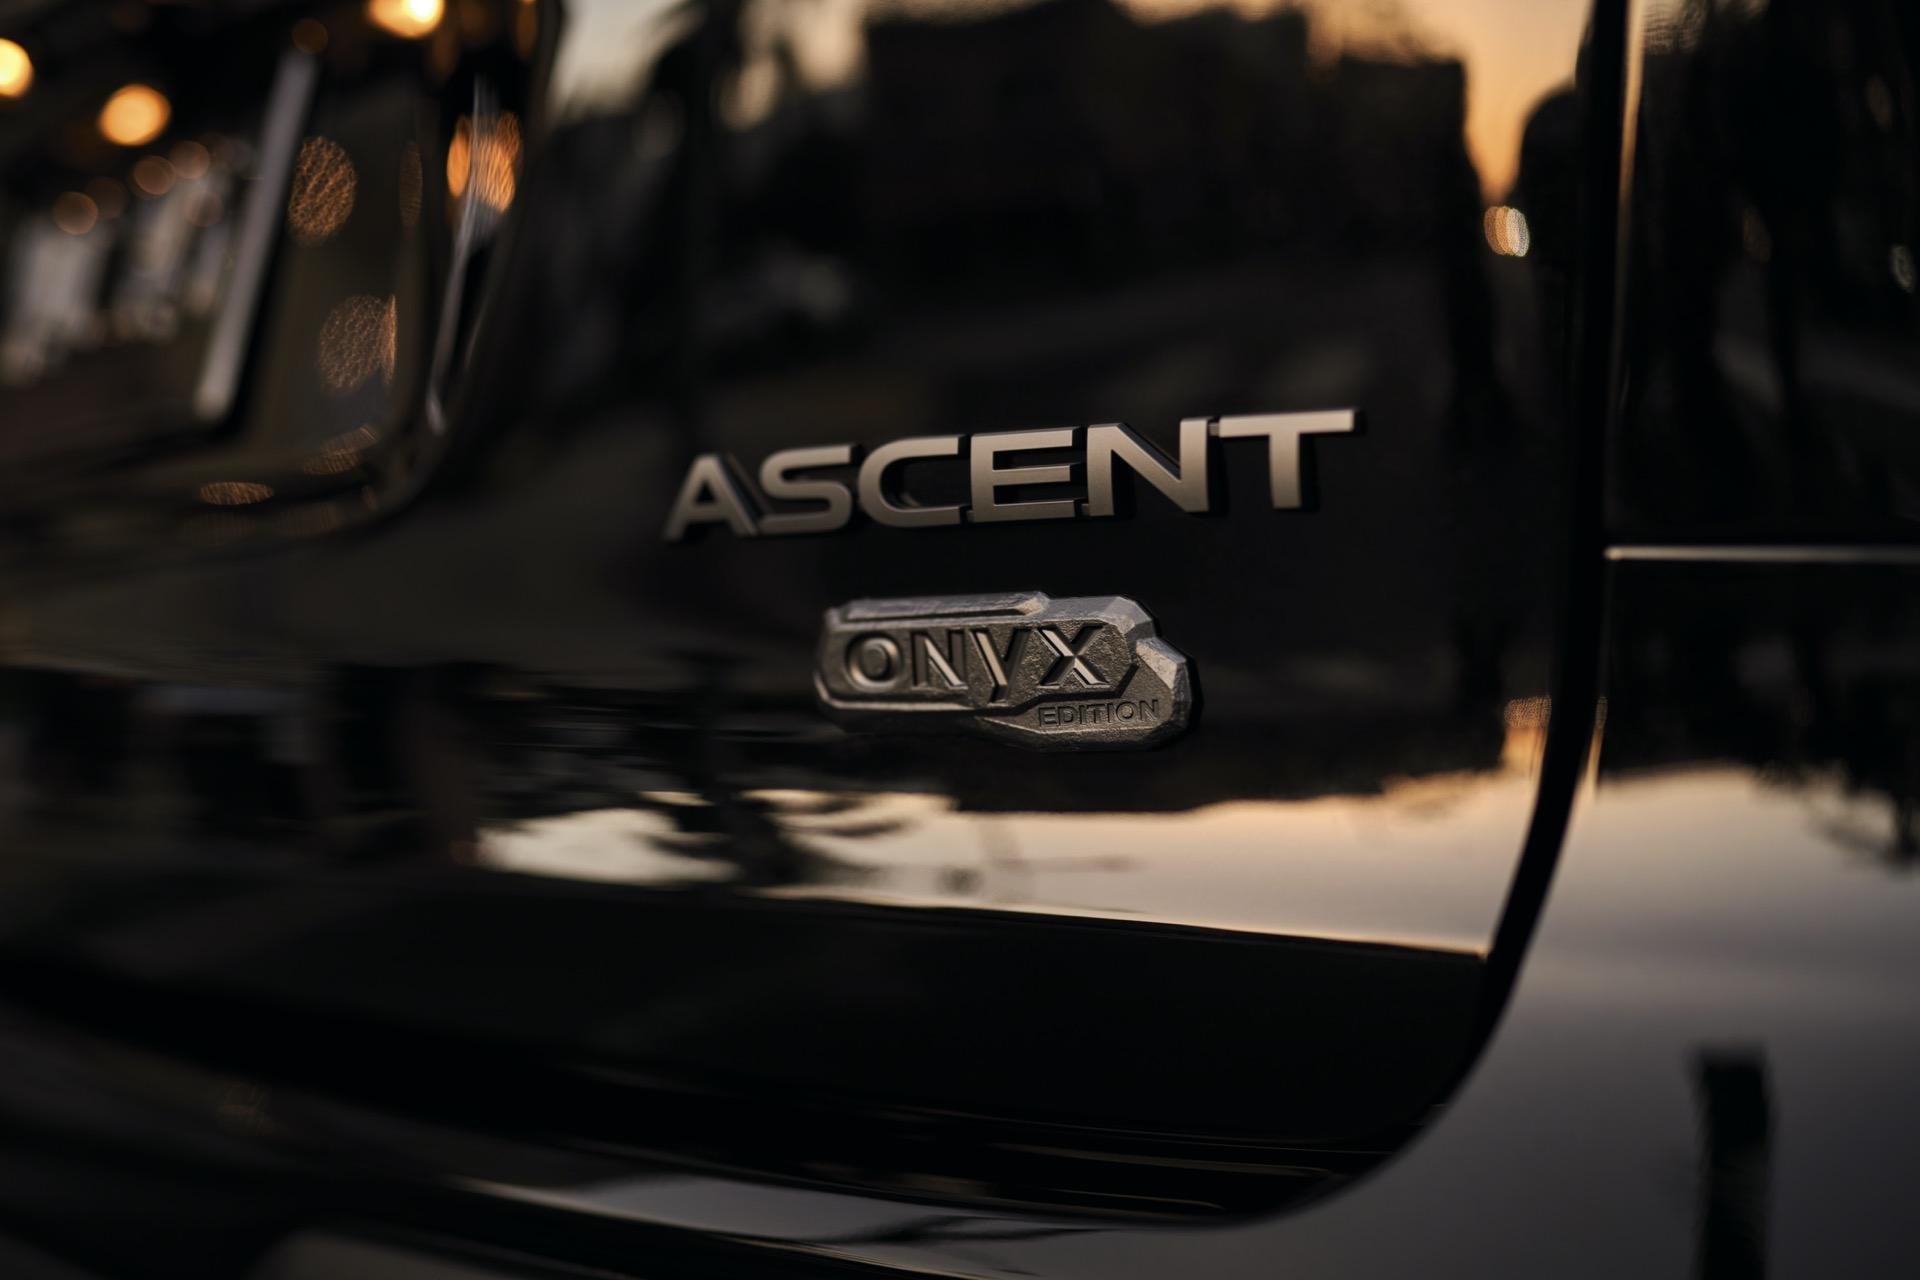 2022 Subaru Ascent Onyx Edition Detail Wallpapers (6)